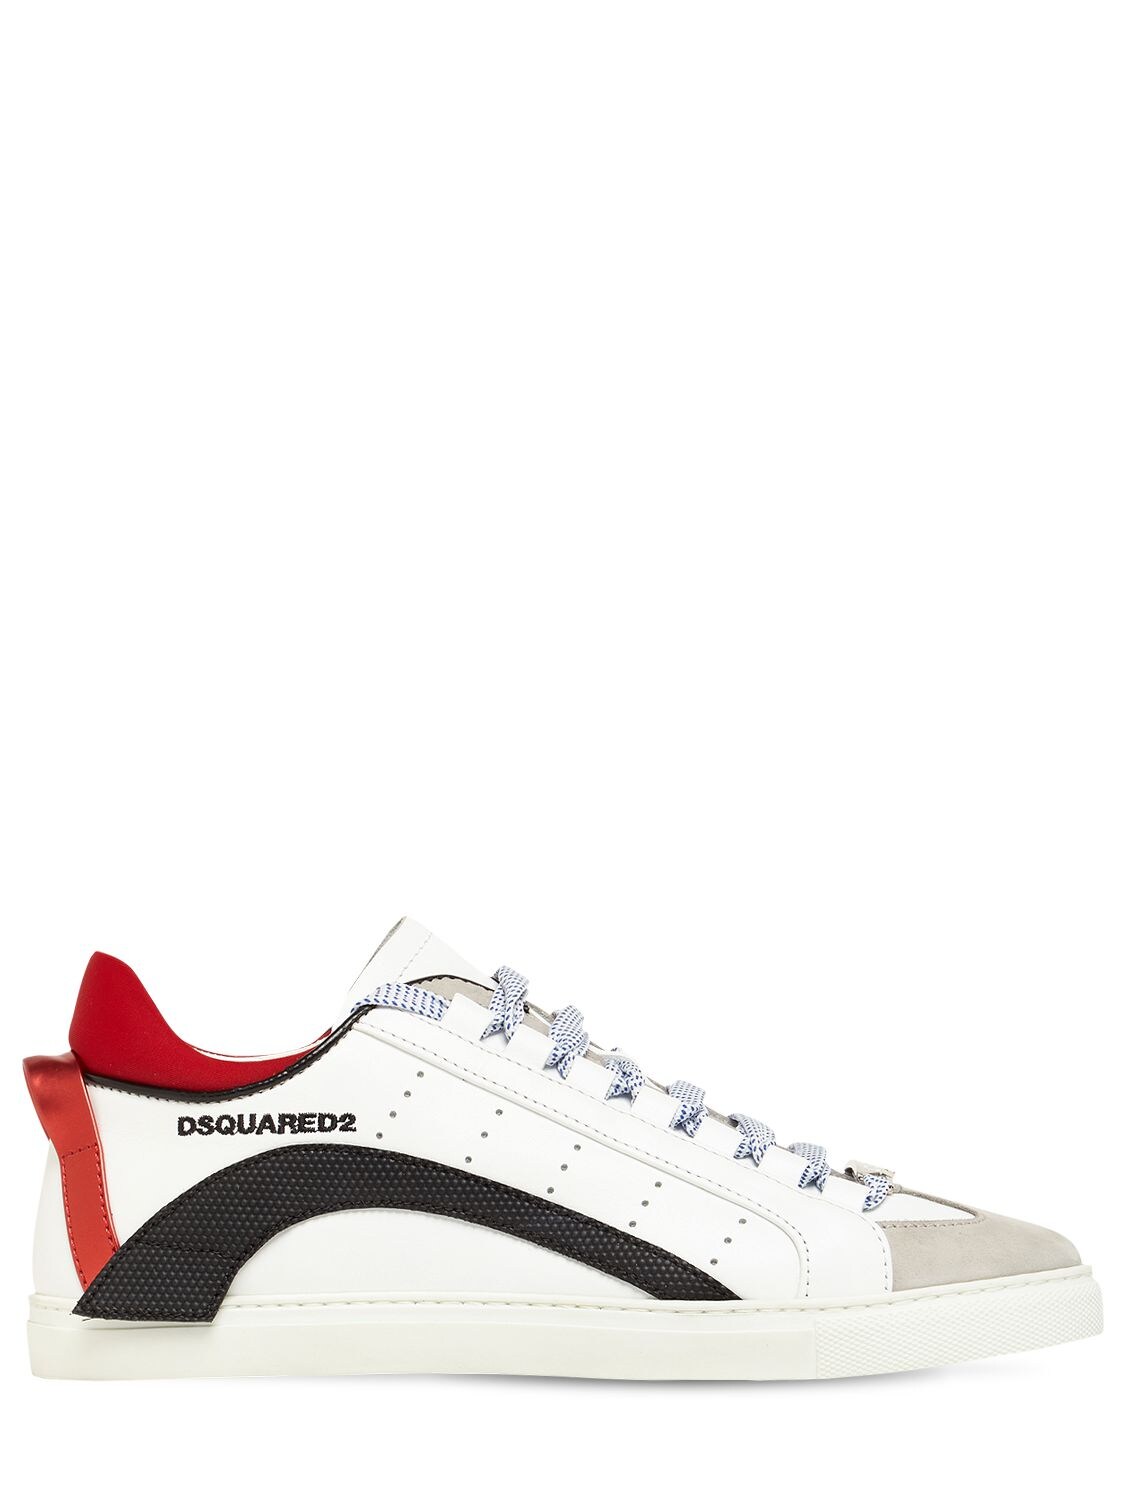 DSQUARED2 NEW 551 LEATHER, RUBBER & SUEDE SNEAKERS,73IGH4015-TTUZNG2